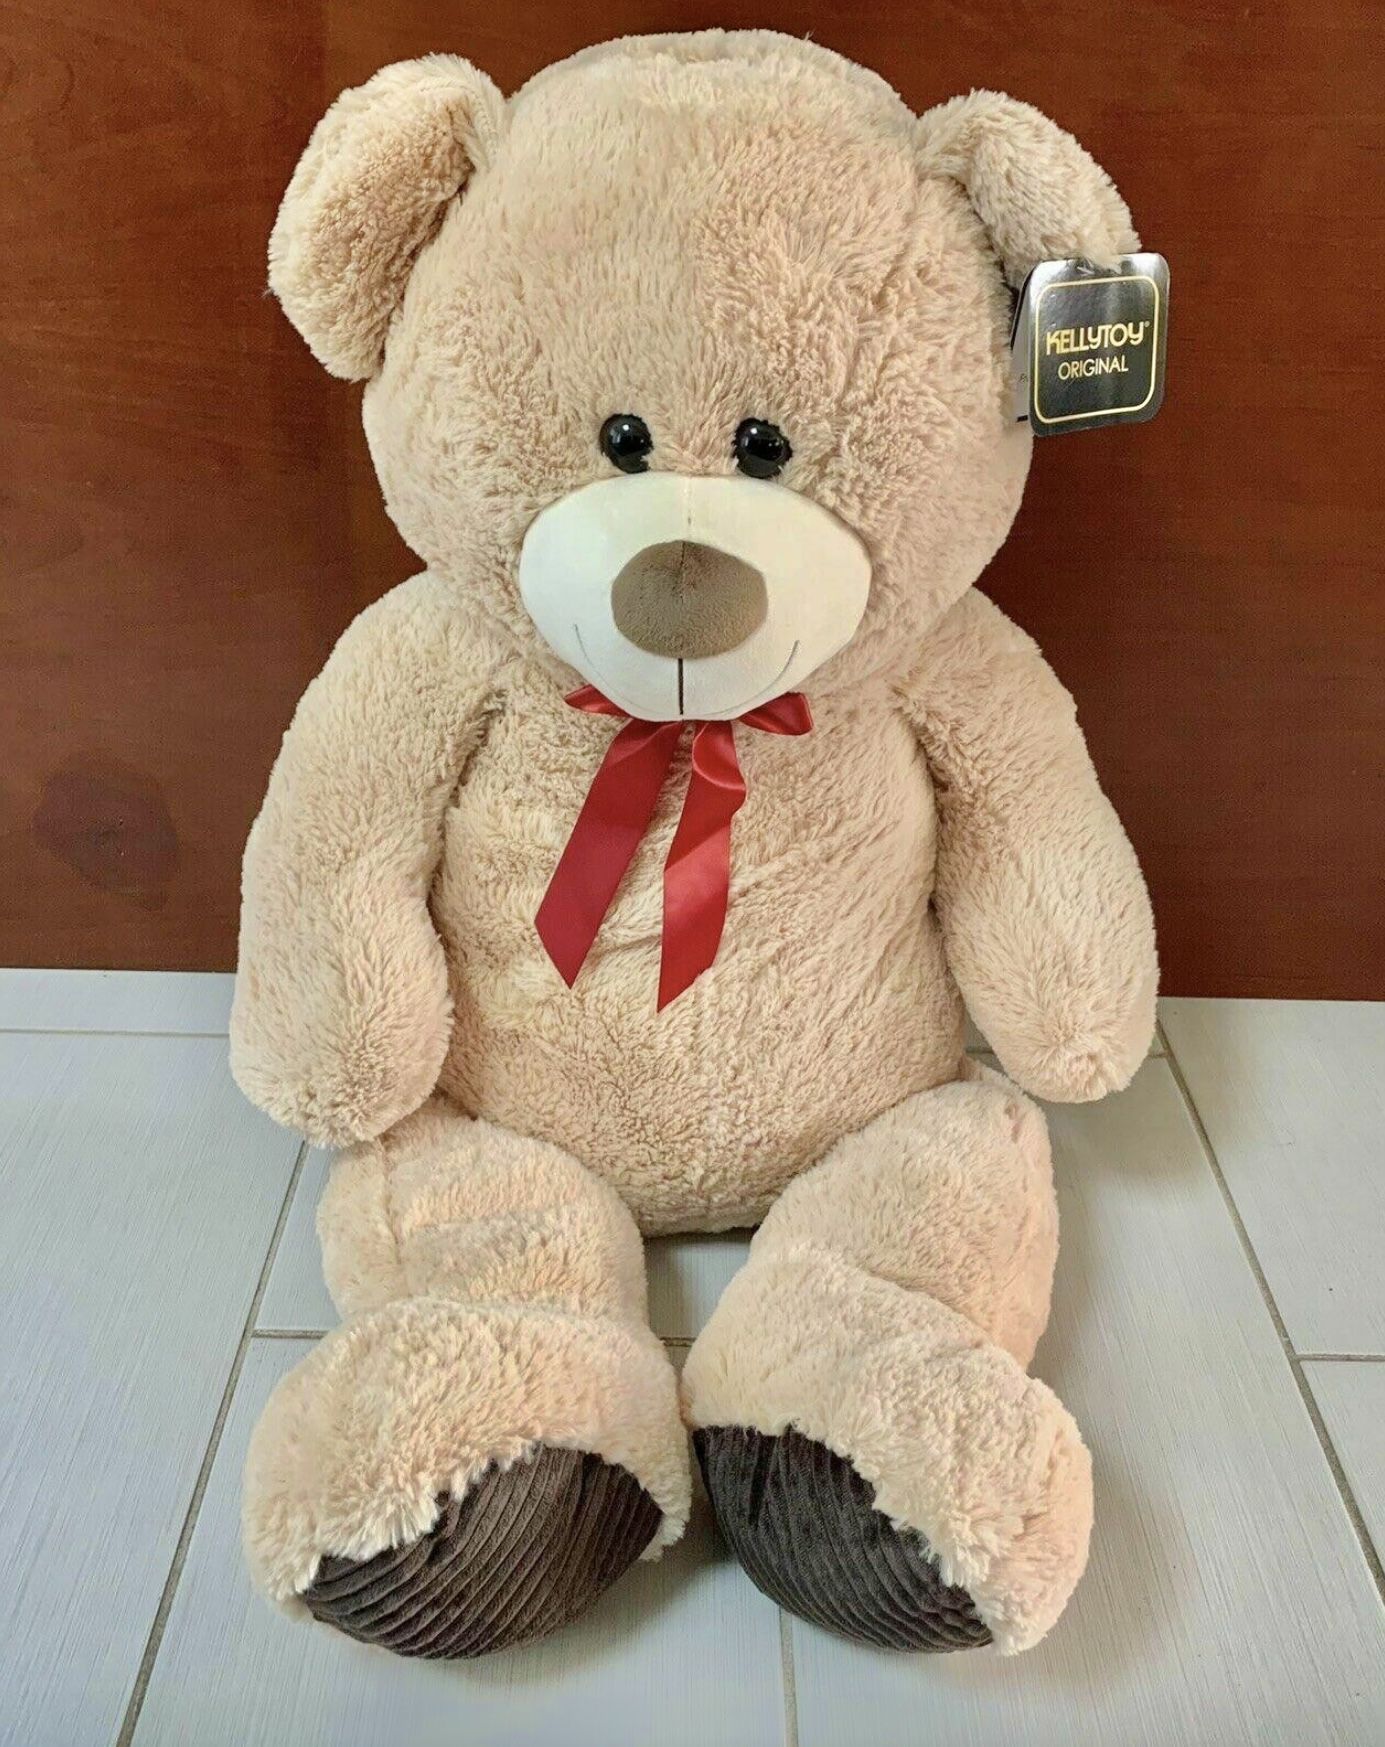 NEW BIG BROWN TEDDY BEAR 40” (We Also Have It In White)